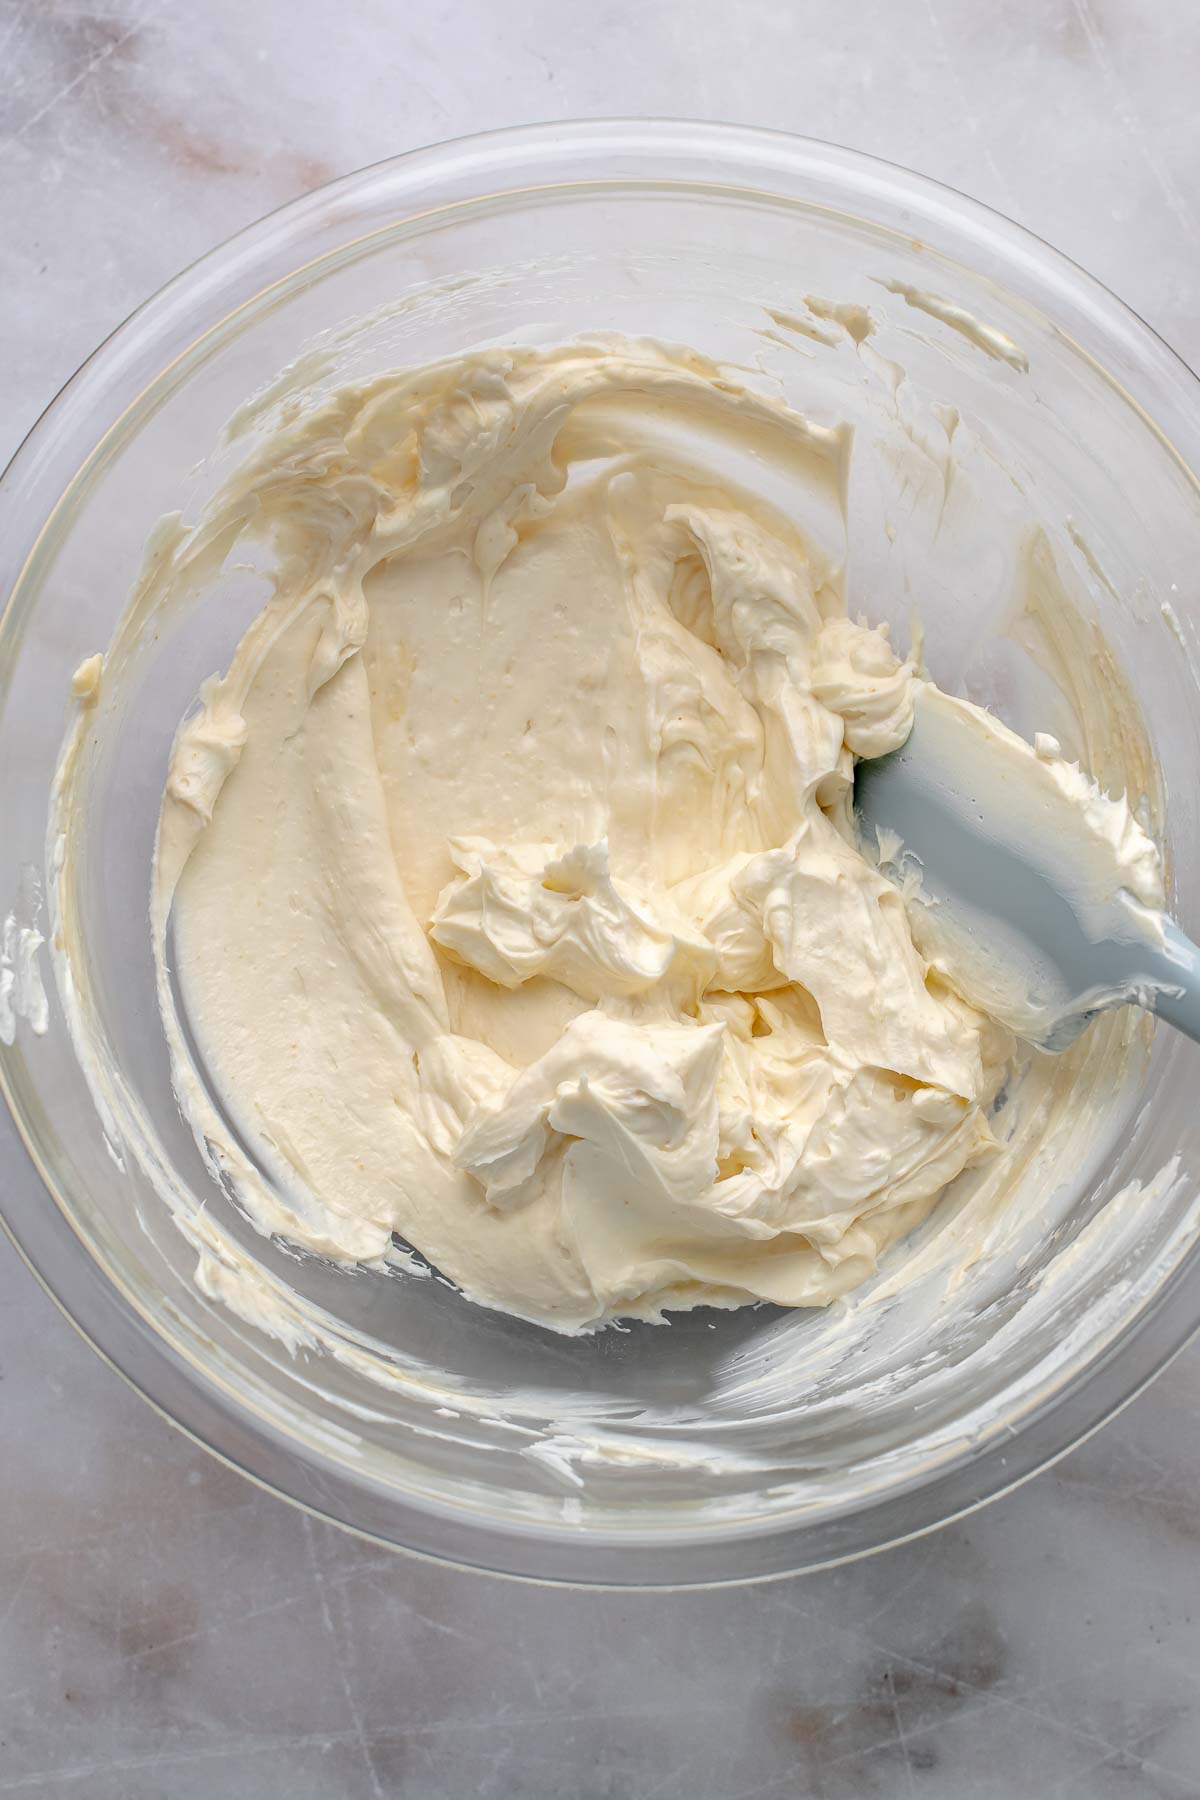 Cream cheese smoothed out in a mixing bowl.